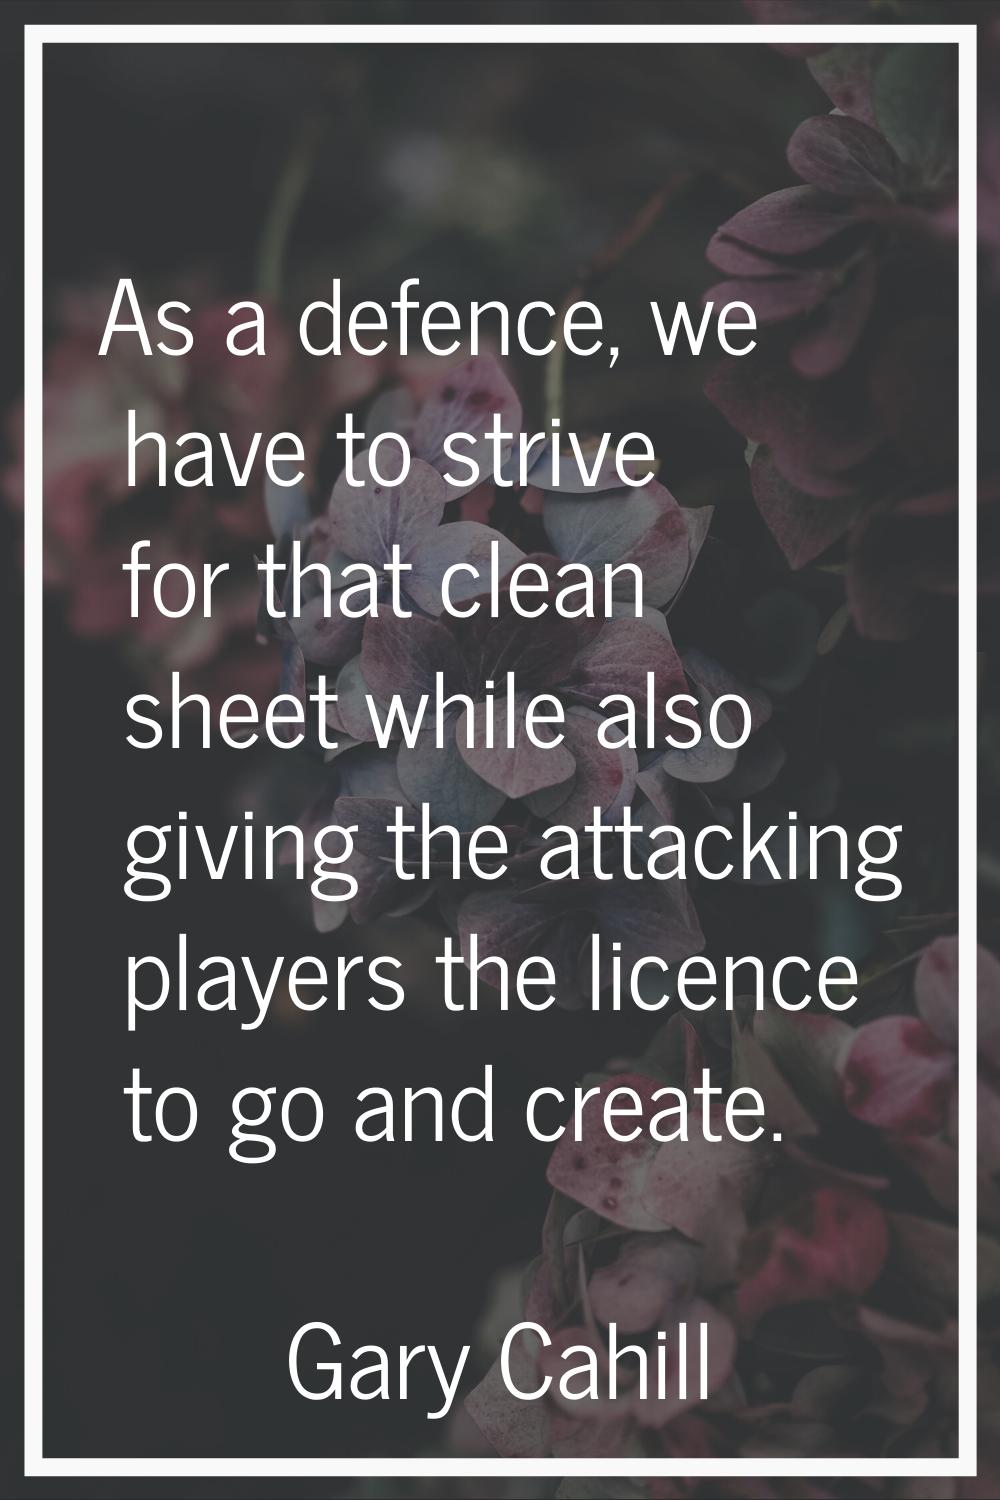 As a defence, we have to strive for that clean sheet while also giving the attacking players the li